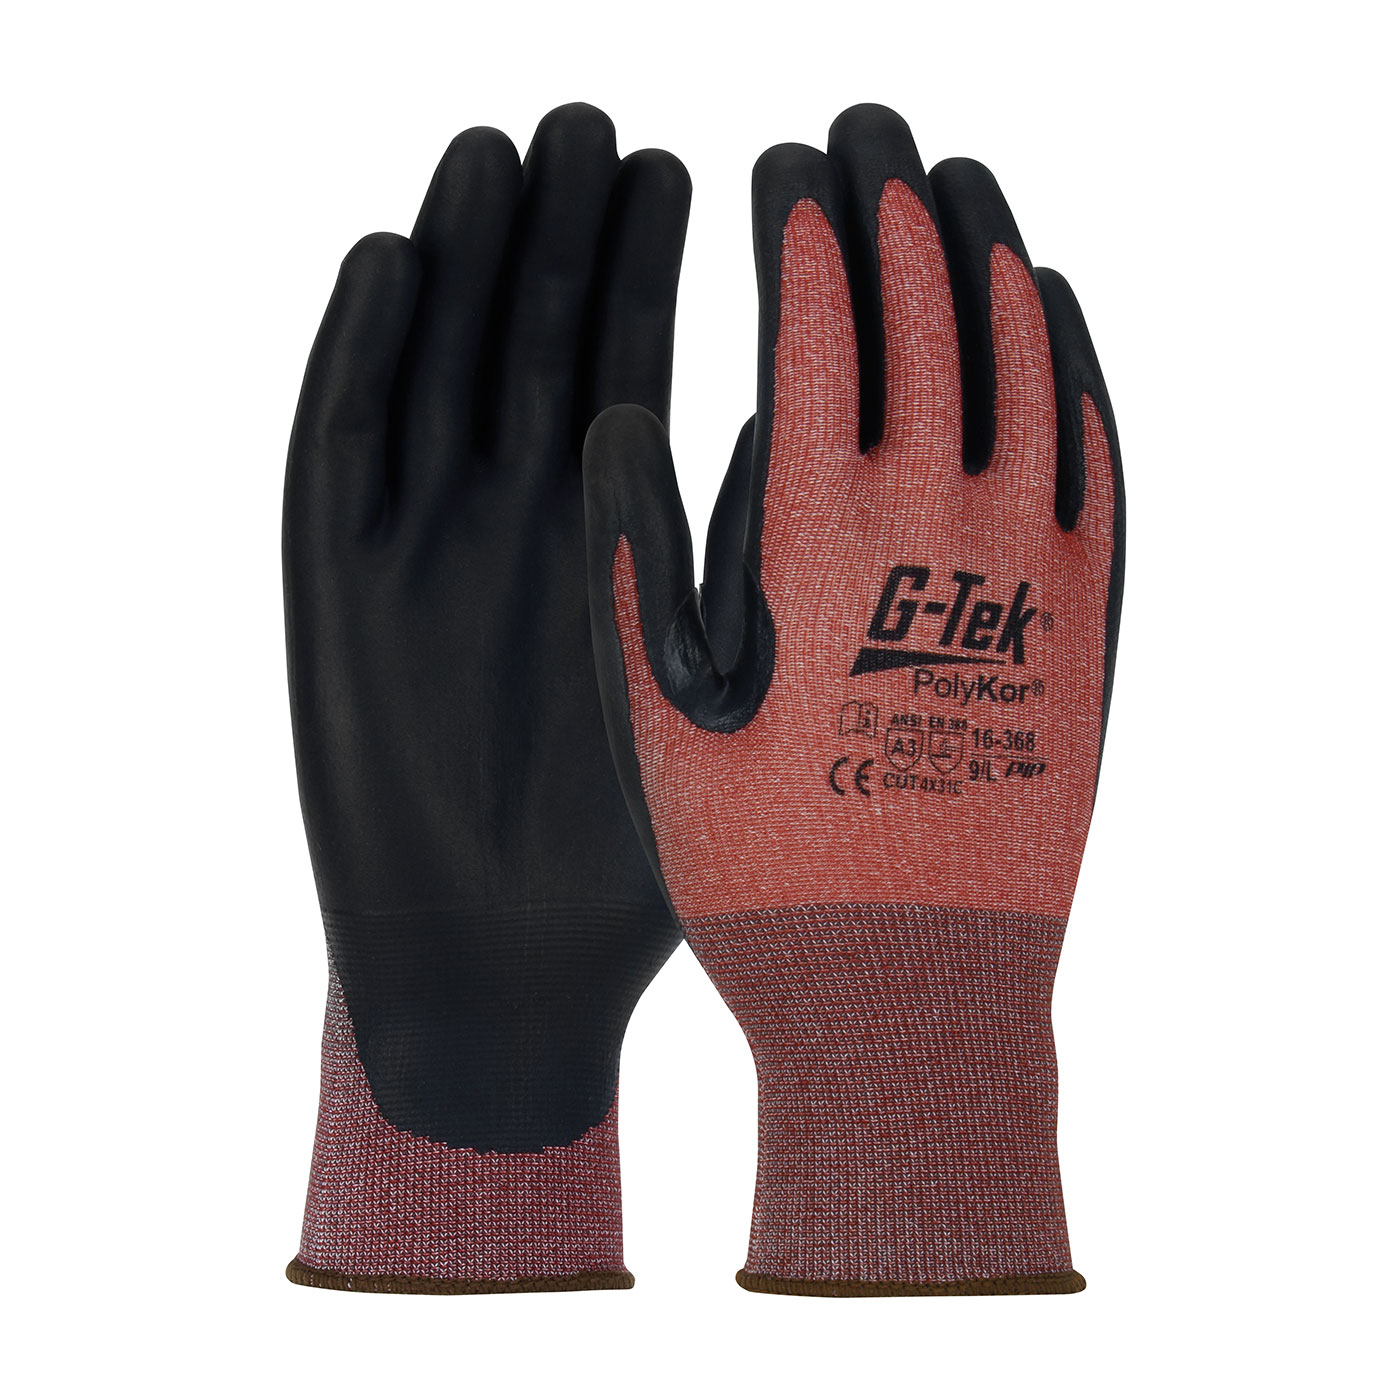 PIP 16-368/XL G-Tek PolyKor X7 Seamless Knit PolyKor X7 Blended Glove with NeoFoam Coated Palm & Fingers - Touchscreen Compatible - X-Large PID-16368XL